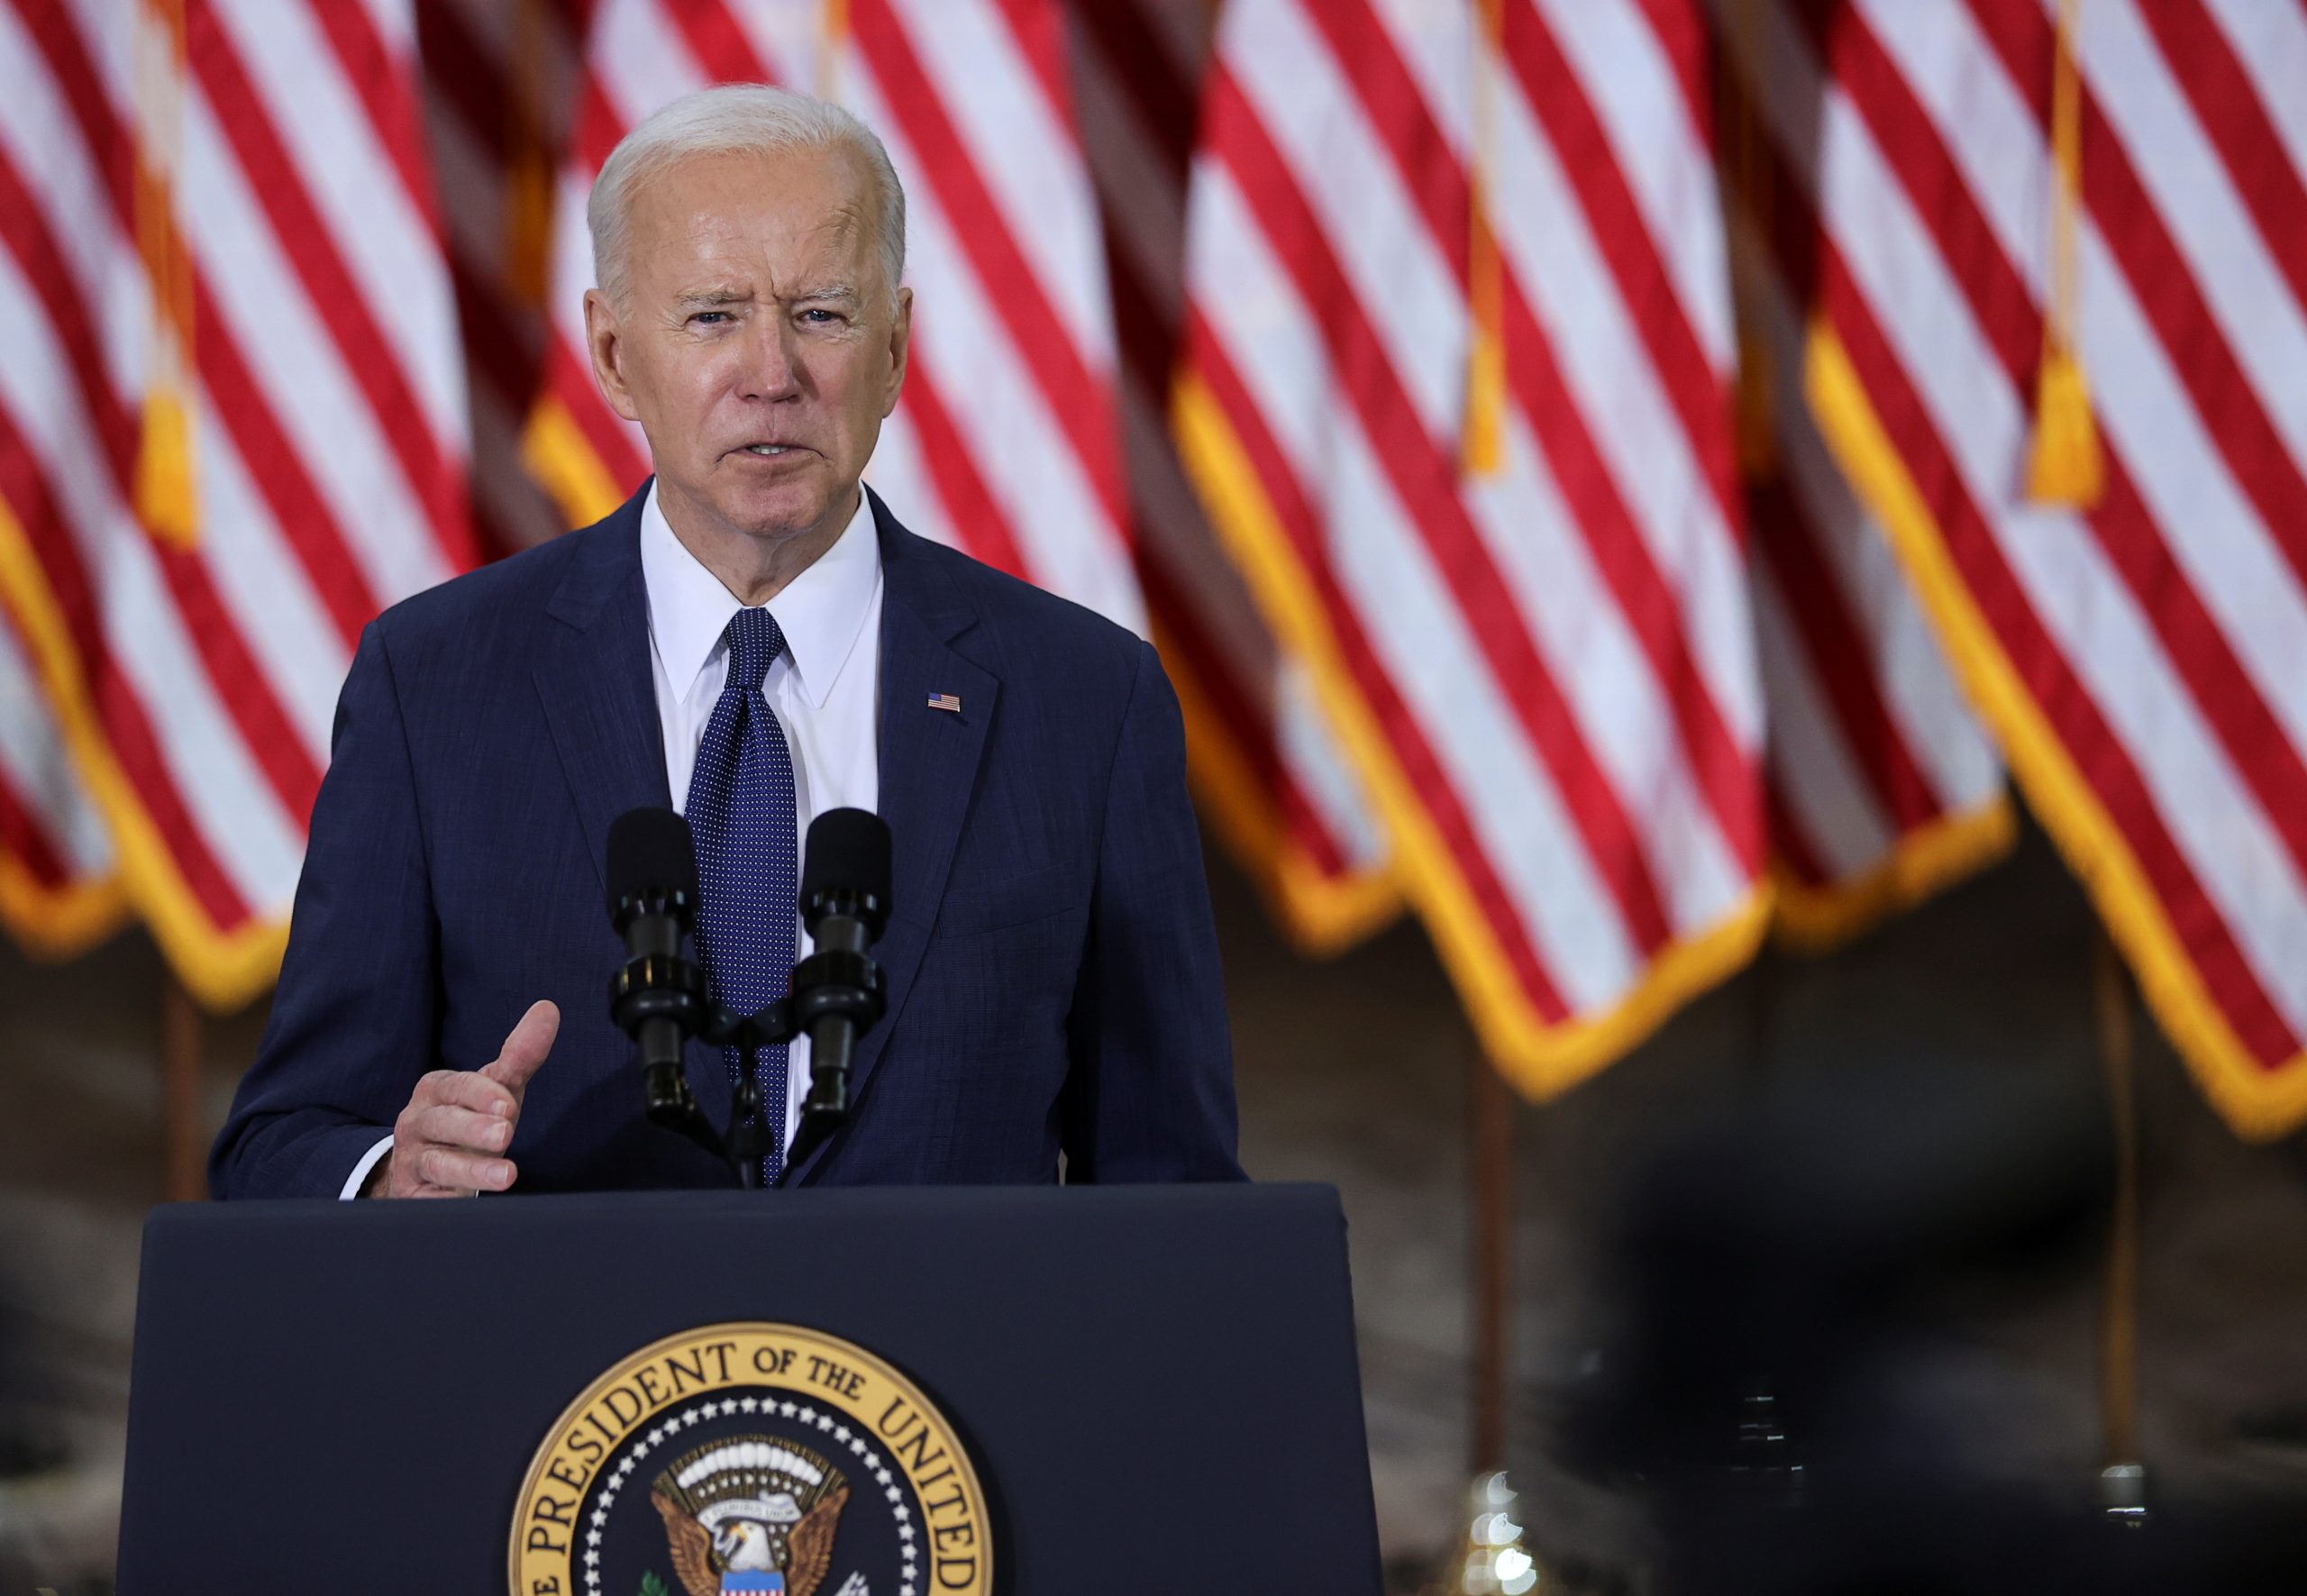 Biden Makes Putin Pay For Election Interference And Hacking With New Sanctions